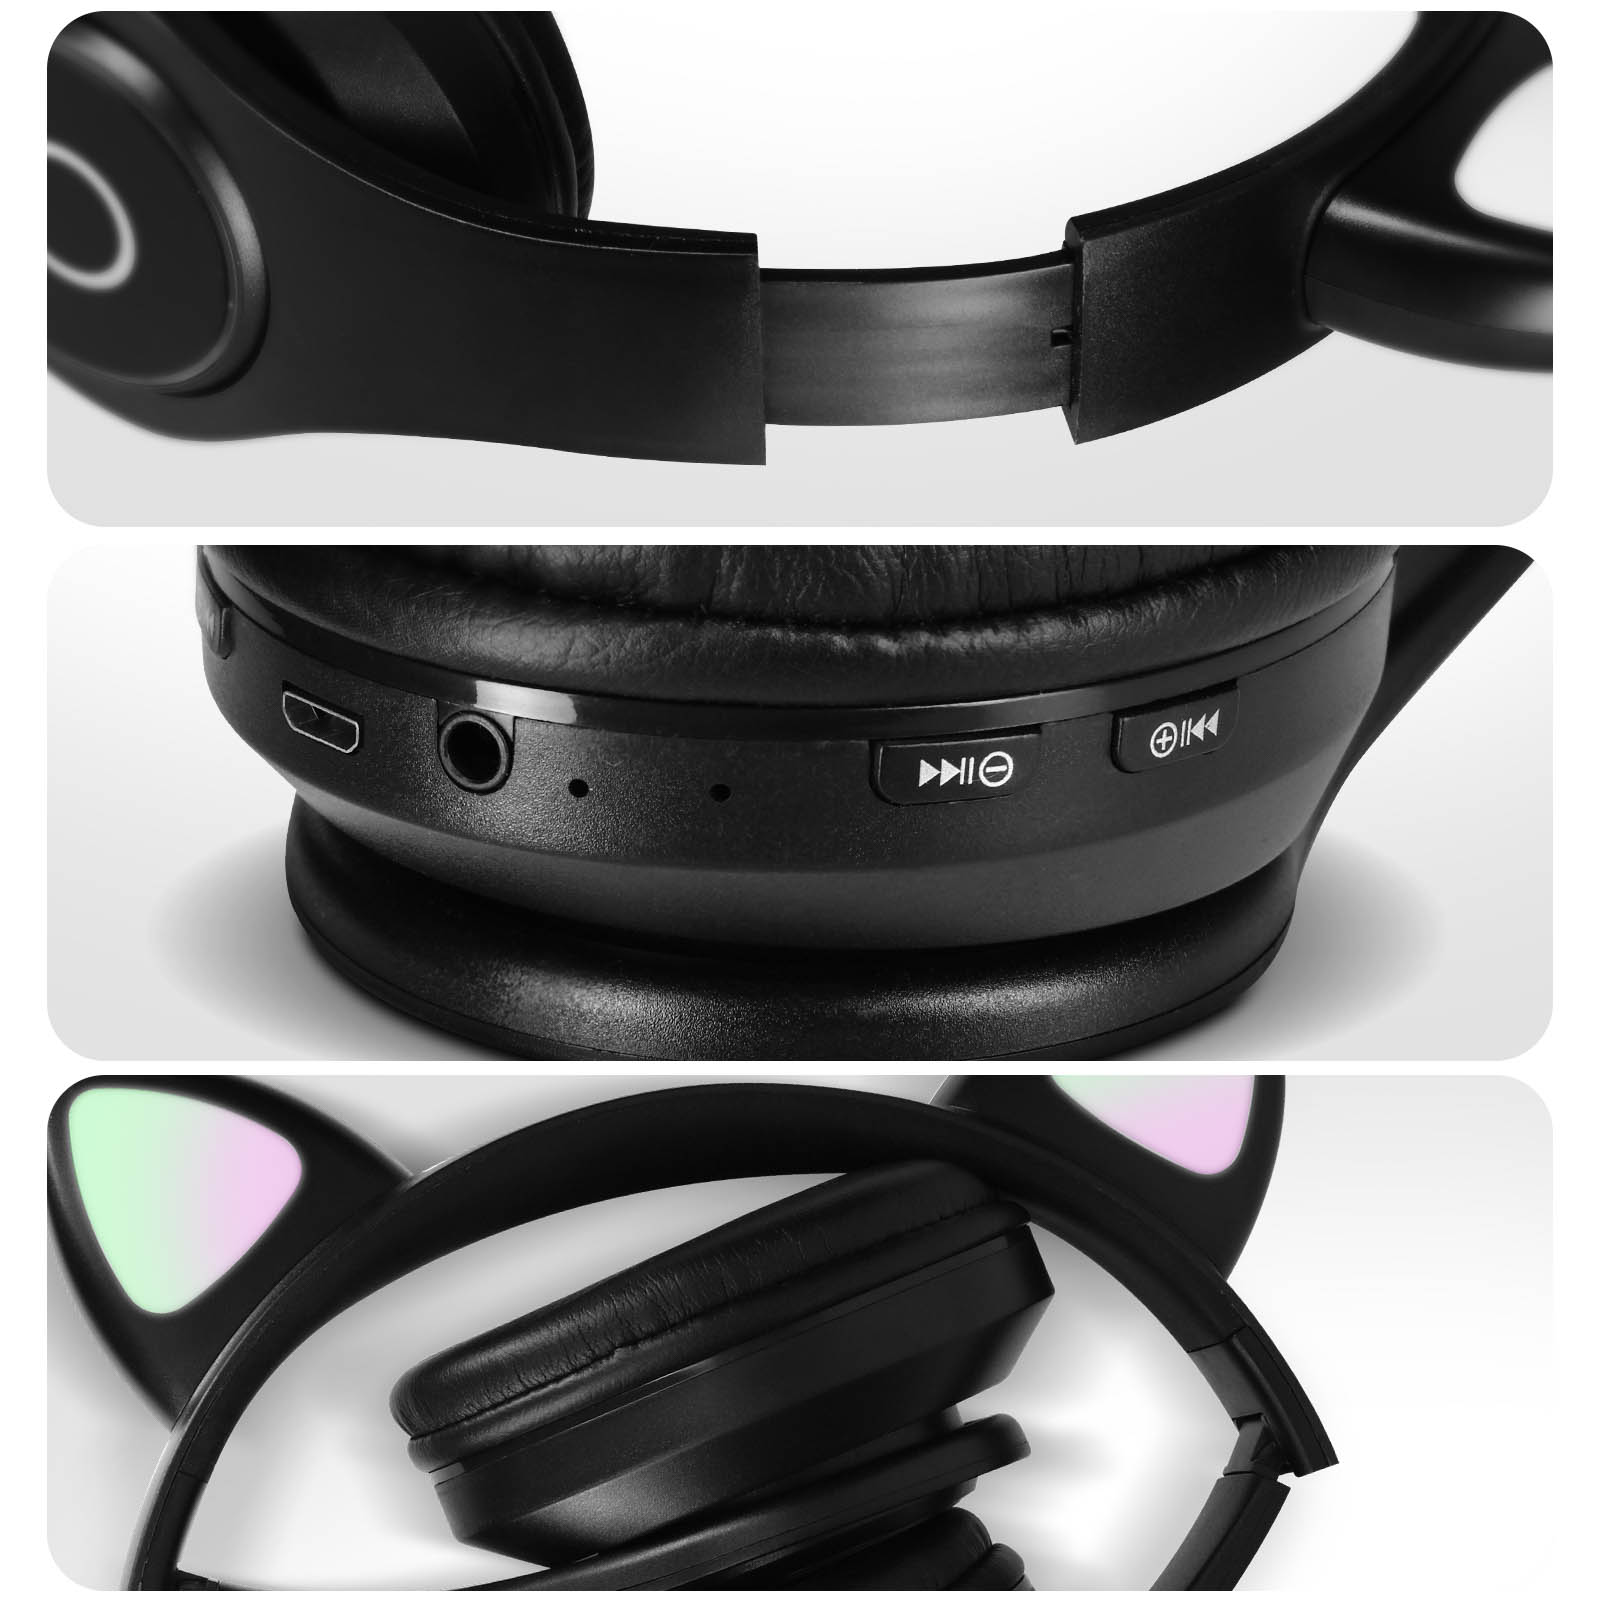 Casque lumineux bluetooth, musiques, sons & images